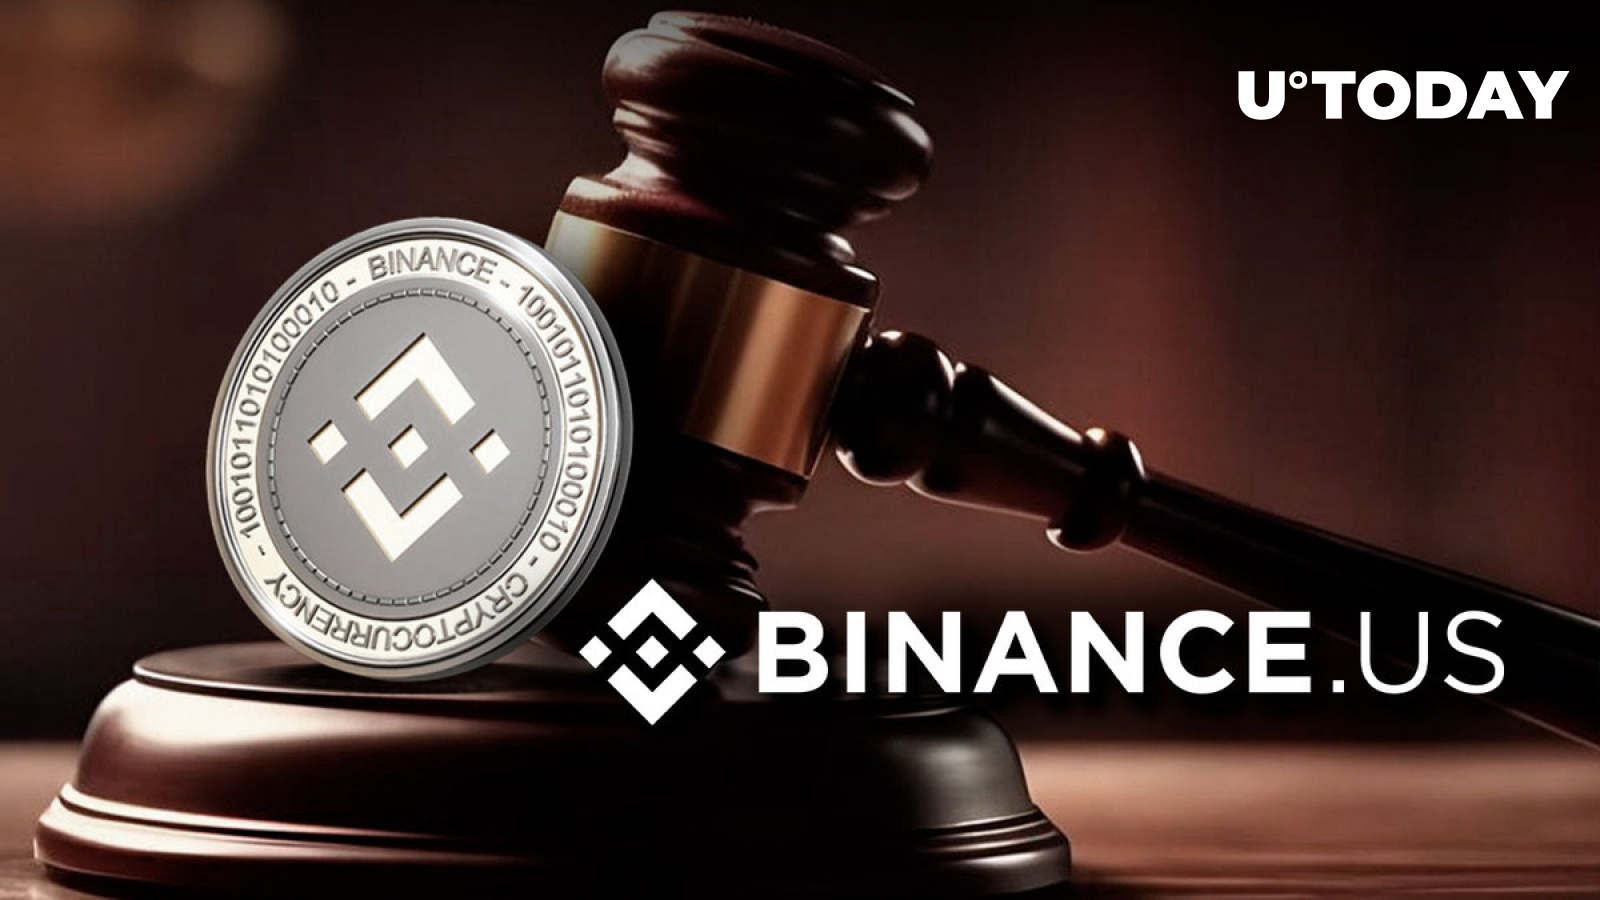 SEC Takes Another Blow in Lawsuit Against Binance